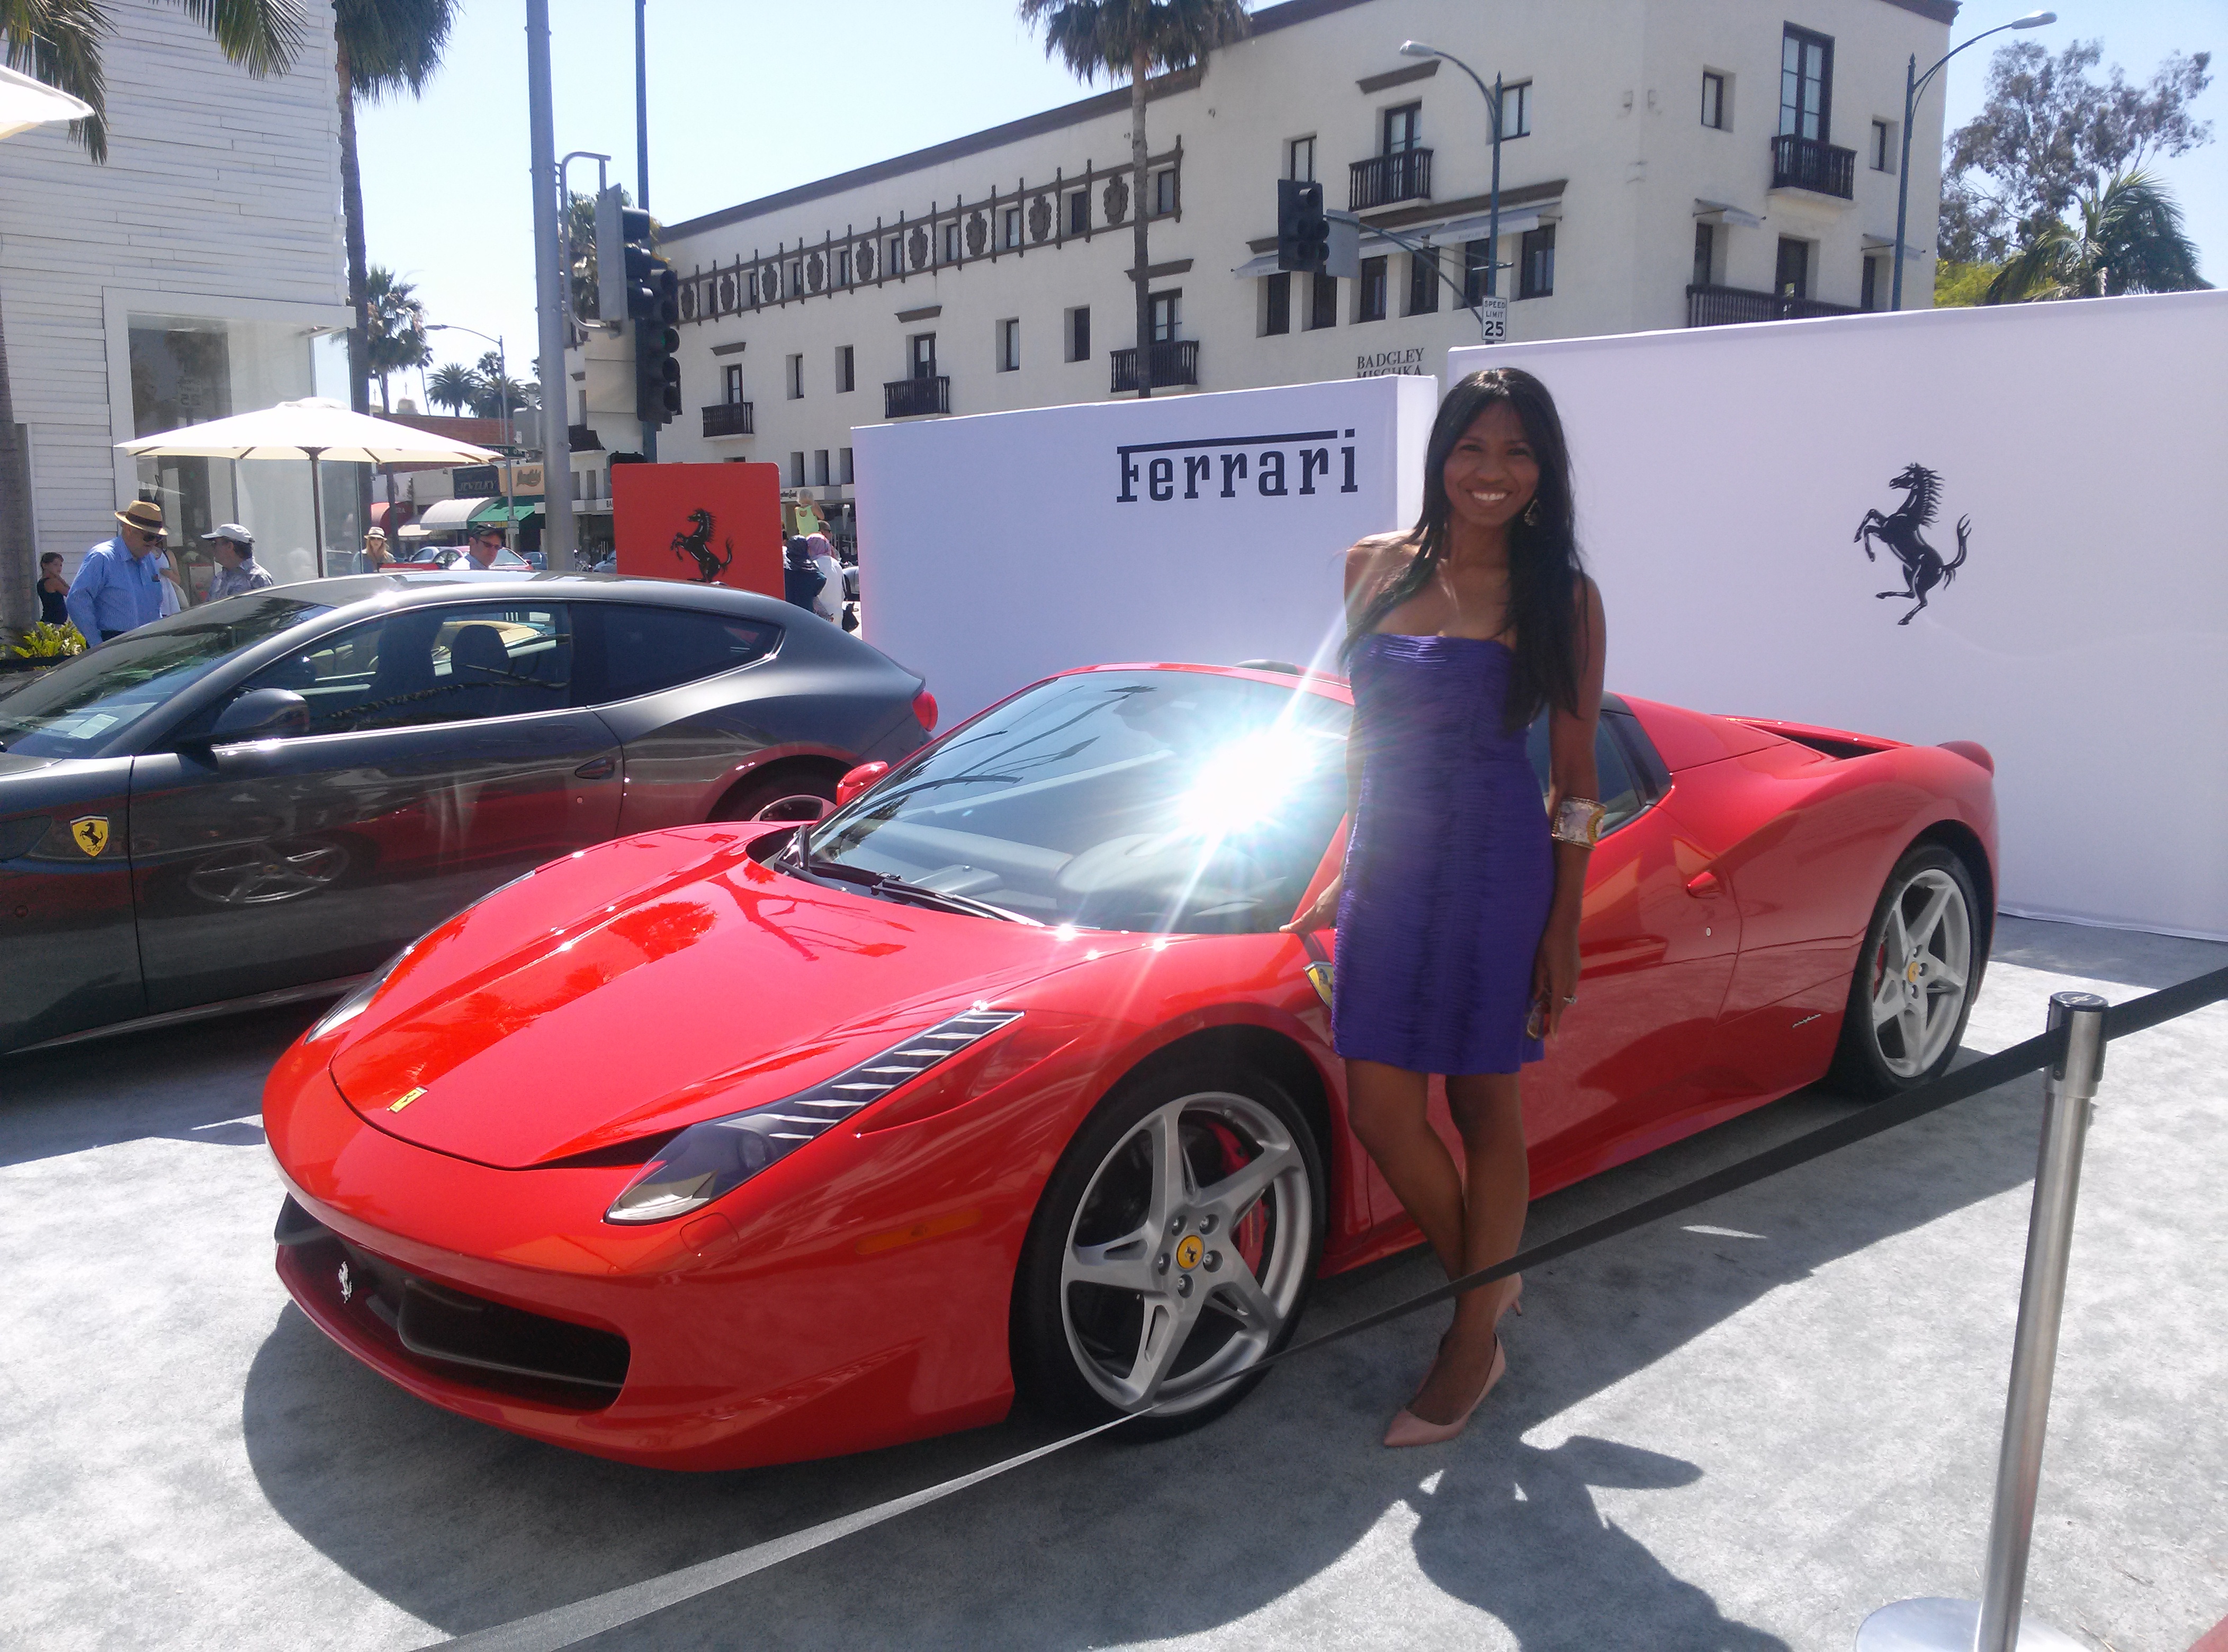 Olympia LePoint, a celebrity guest at the 2013 Ferrari Car Show in Beverly Hills, California.